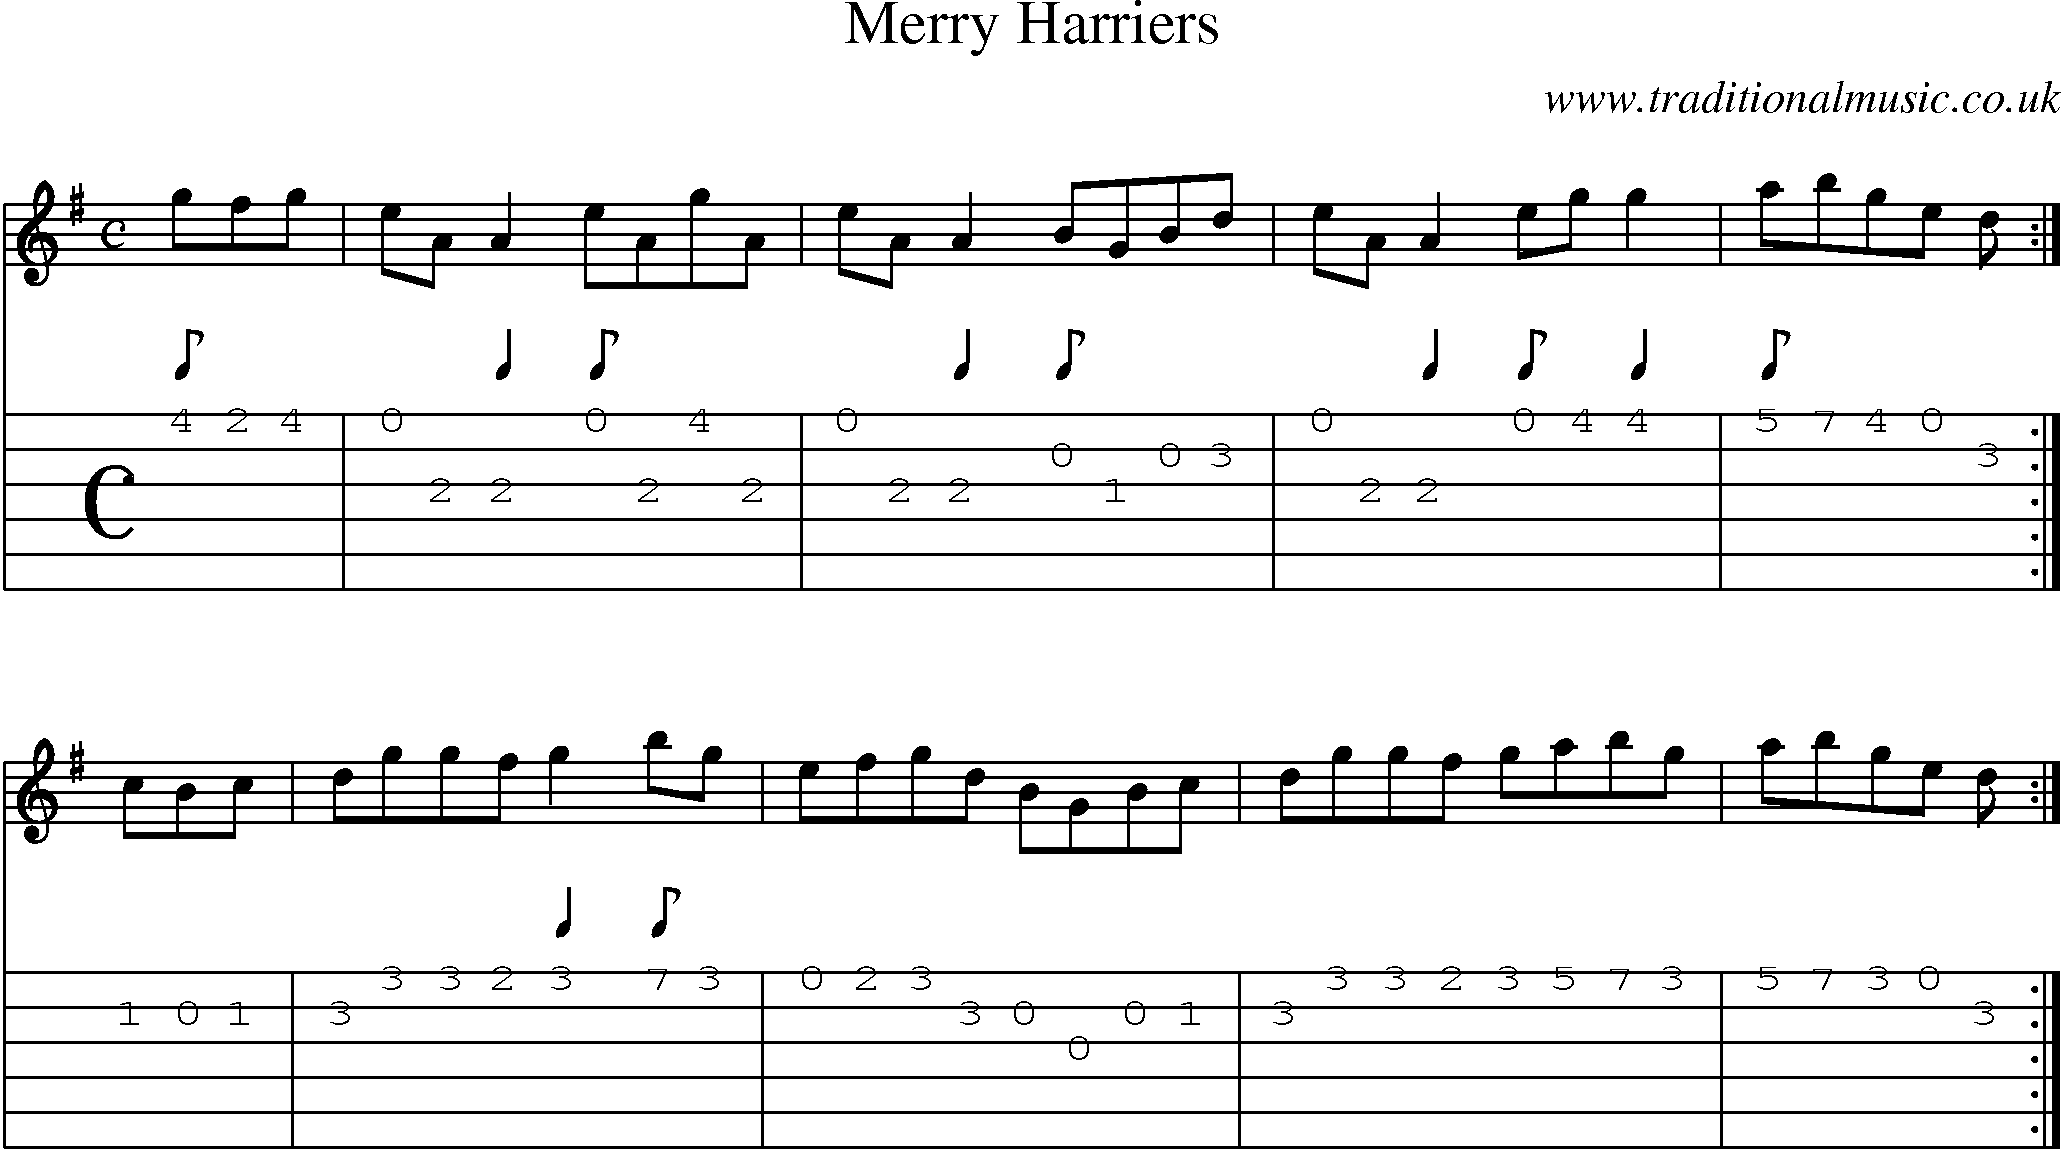 Music Score and Guitar Tabs for Merry Harriers